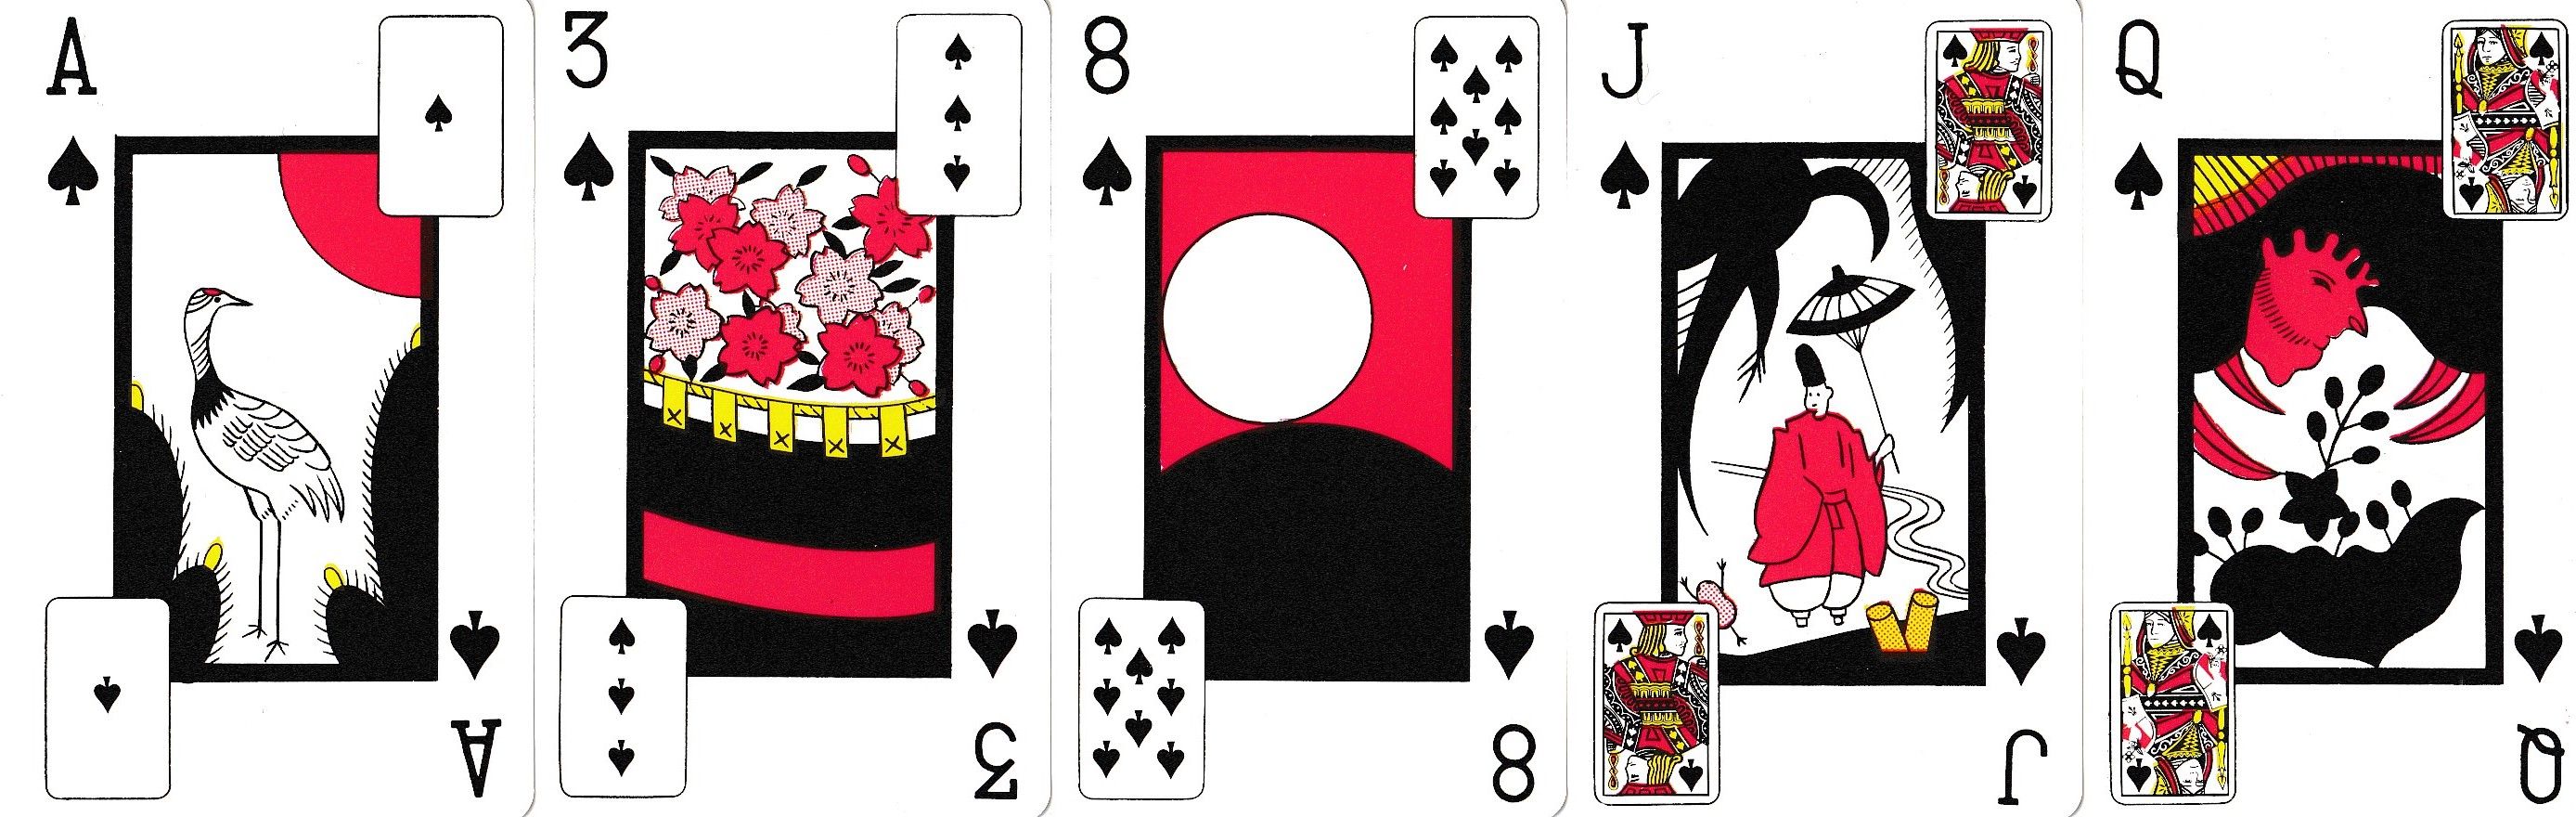 Five playing cards with the Hanafuda design in center and a corresponding Western card depicted in the corners that are not occupied by the card indices.